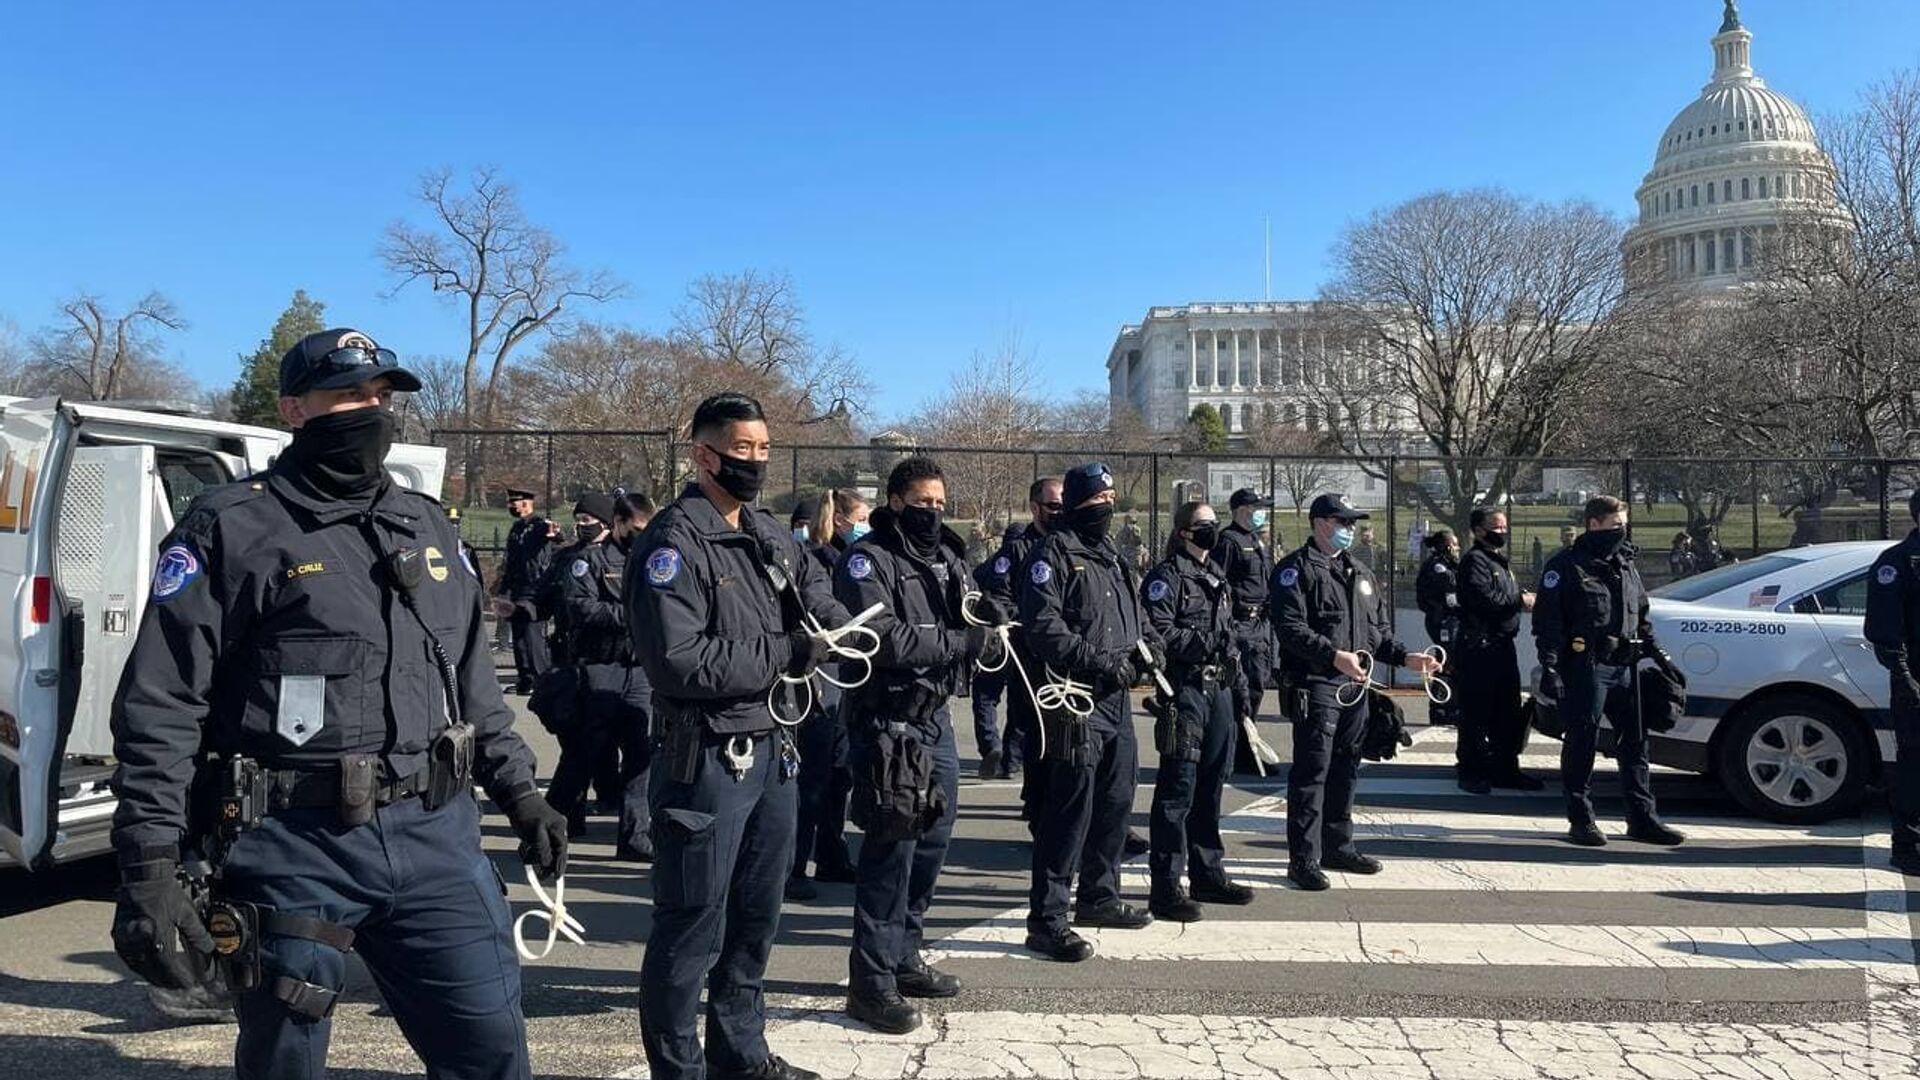 Police officers stand on guard outside US Capitol building as House of Representatives votes to impeach Trump - Sputnik International, 1920, 17.04.2021